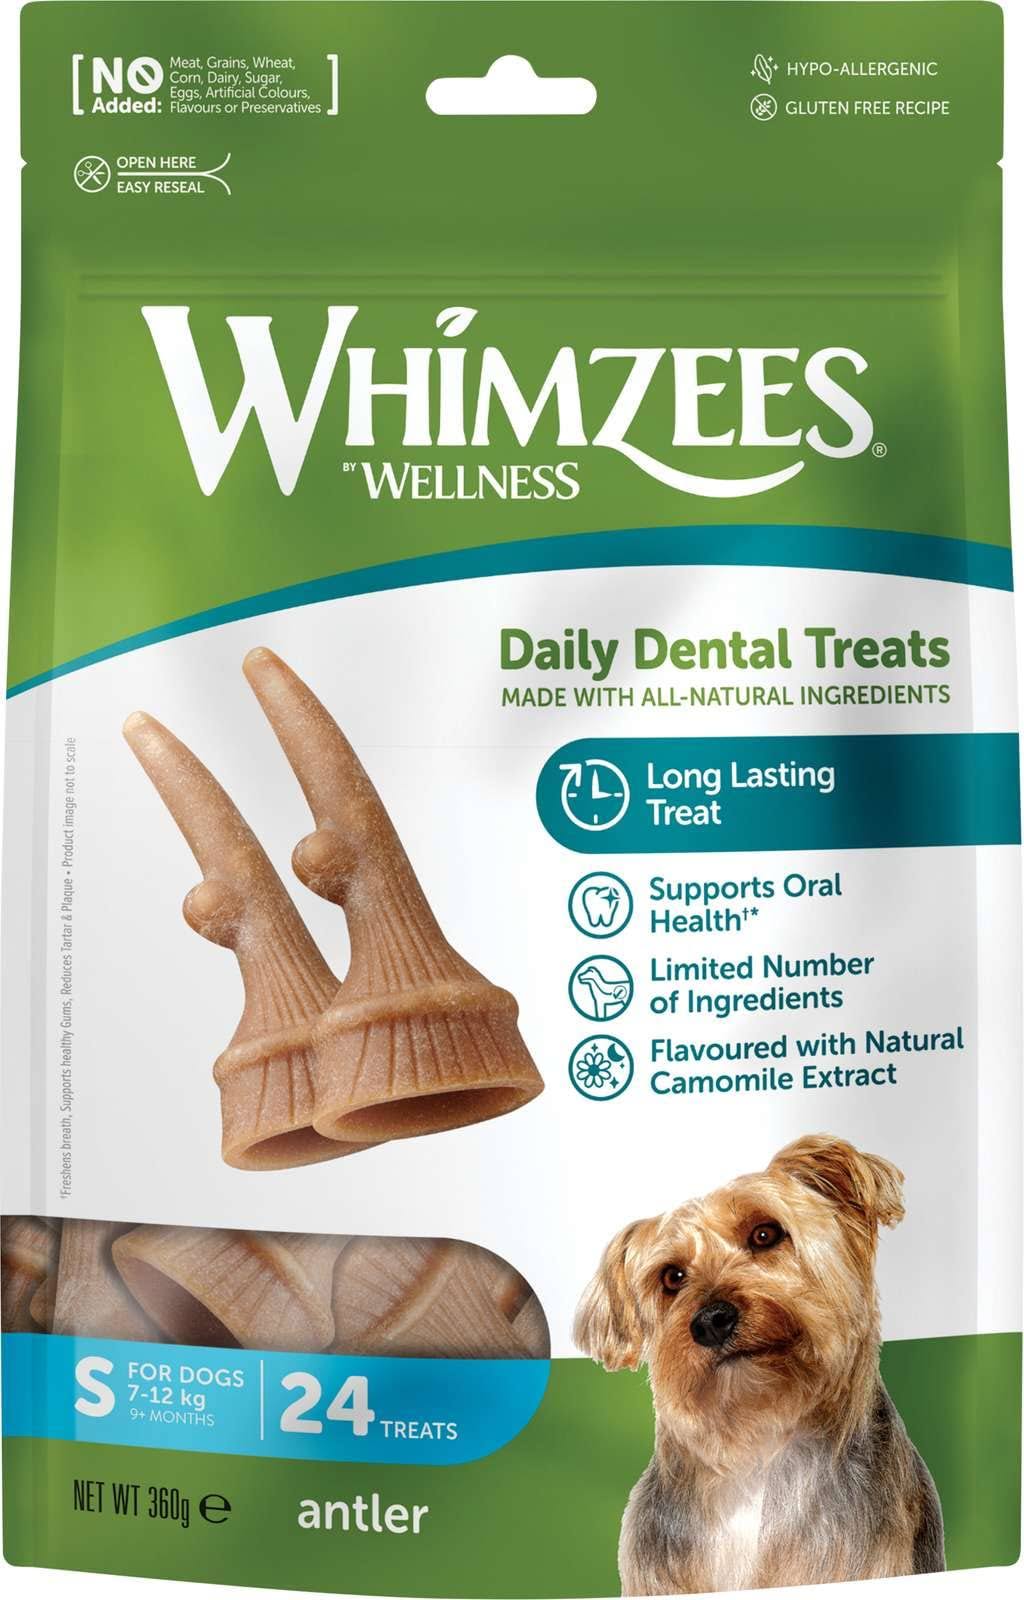 Whimzees Antler Small Dog Treats - 24 Pack